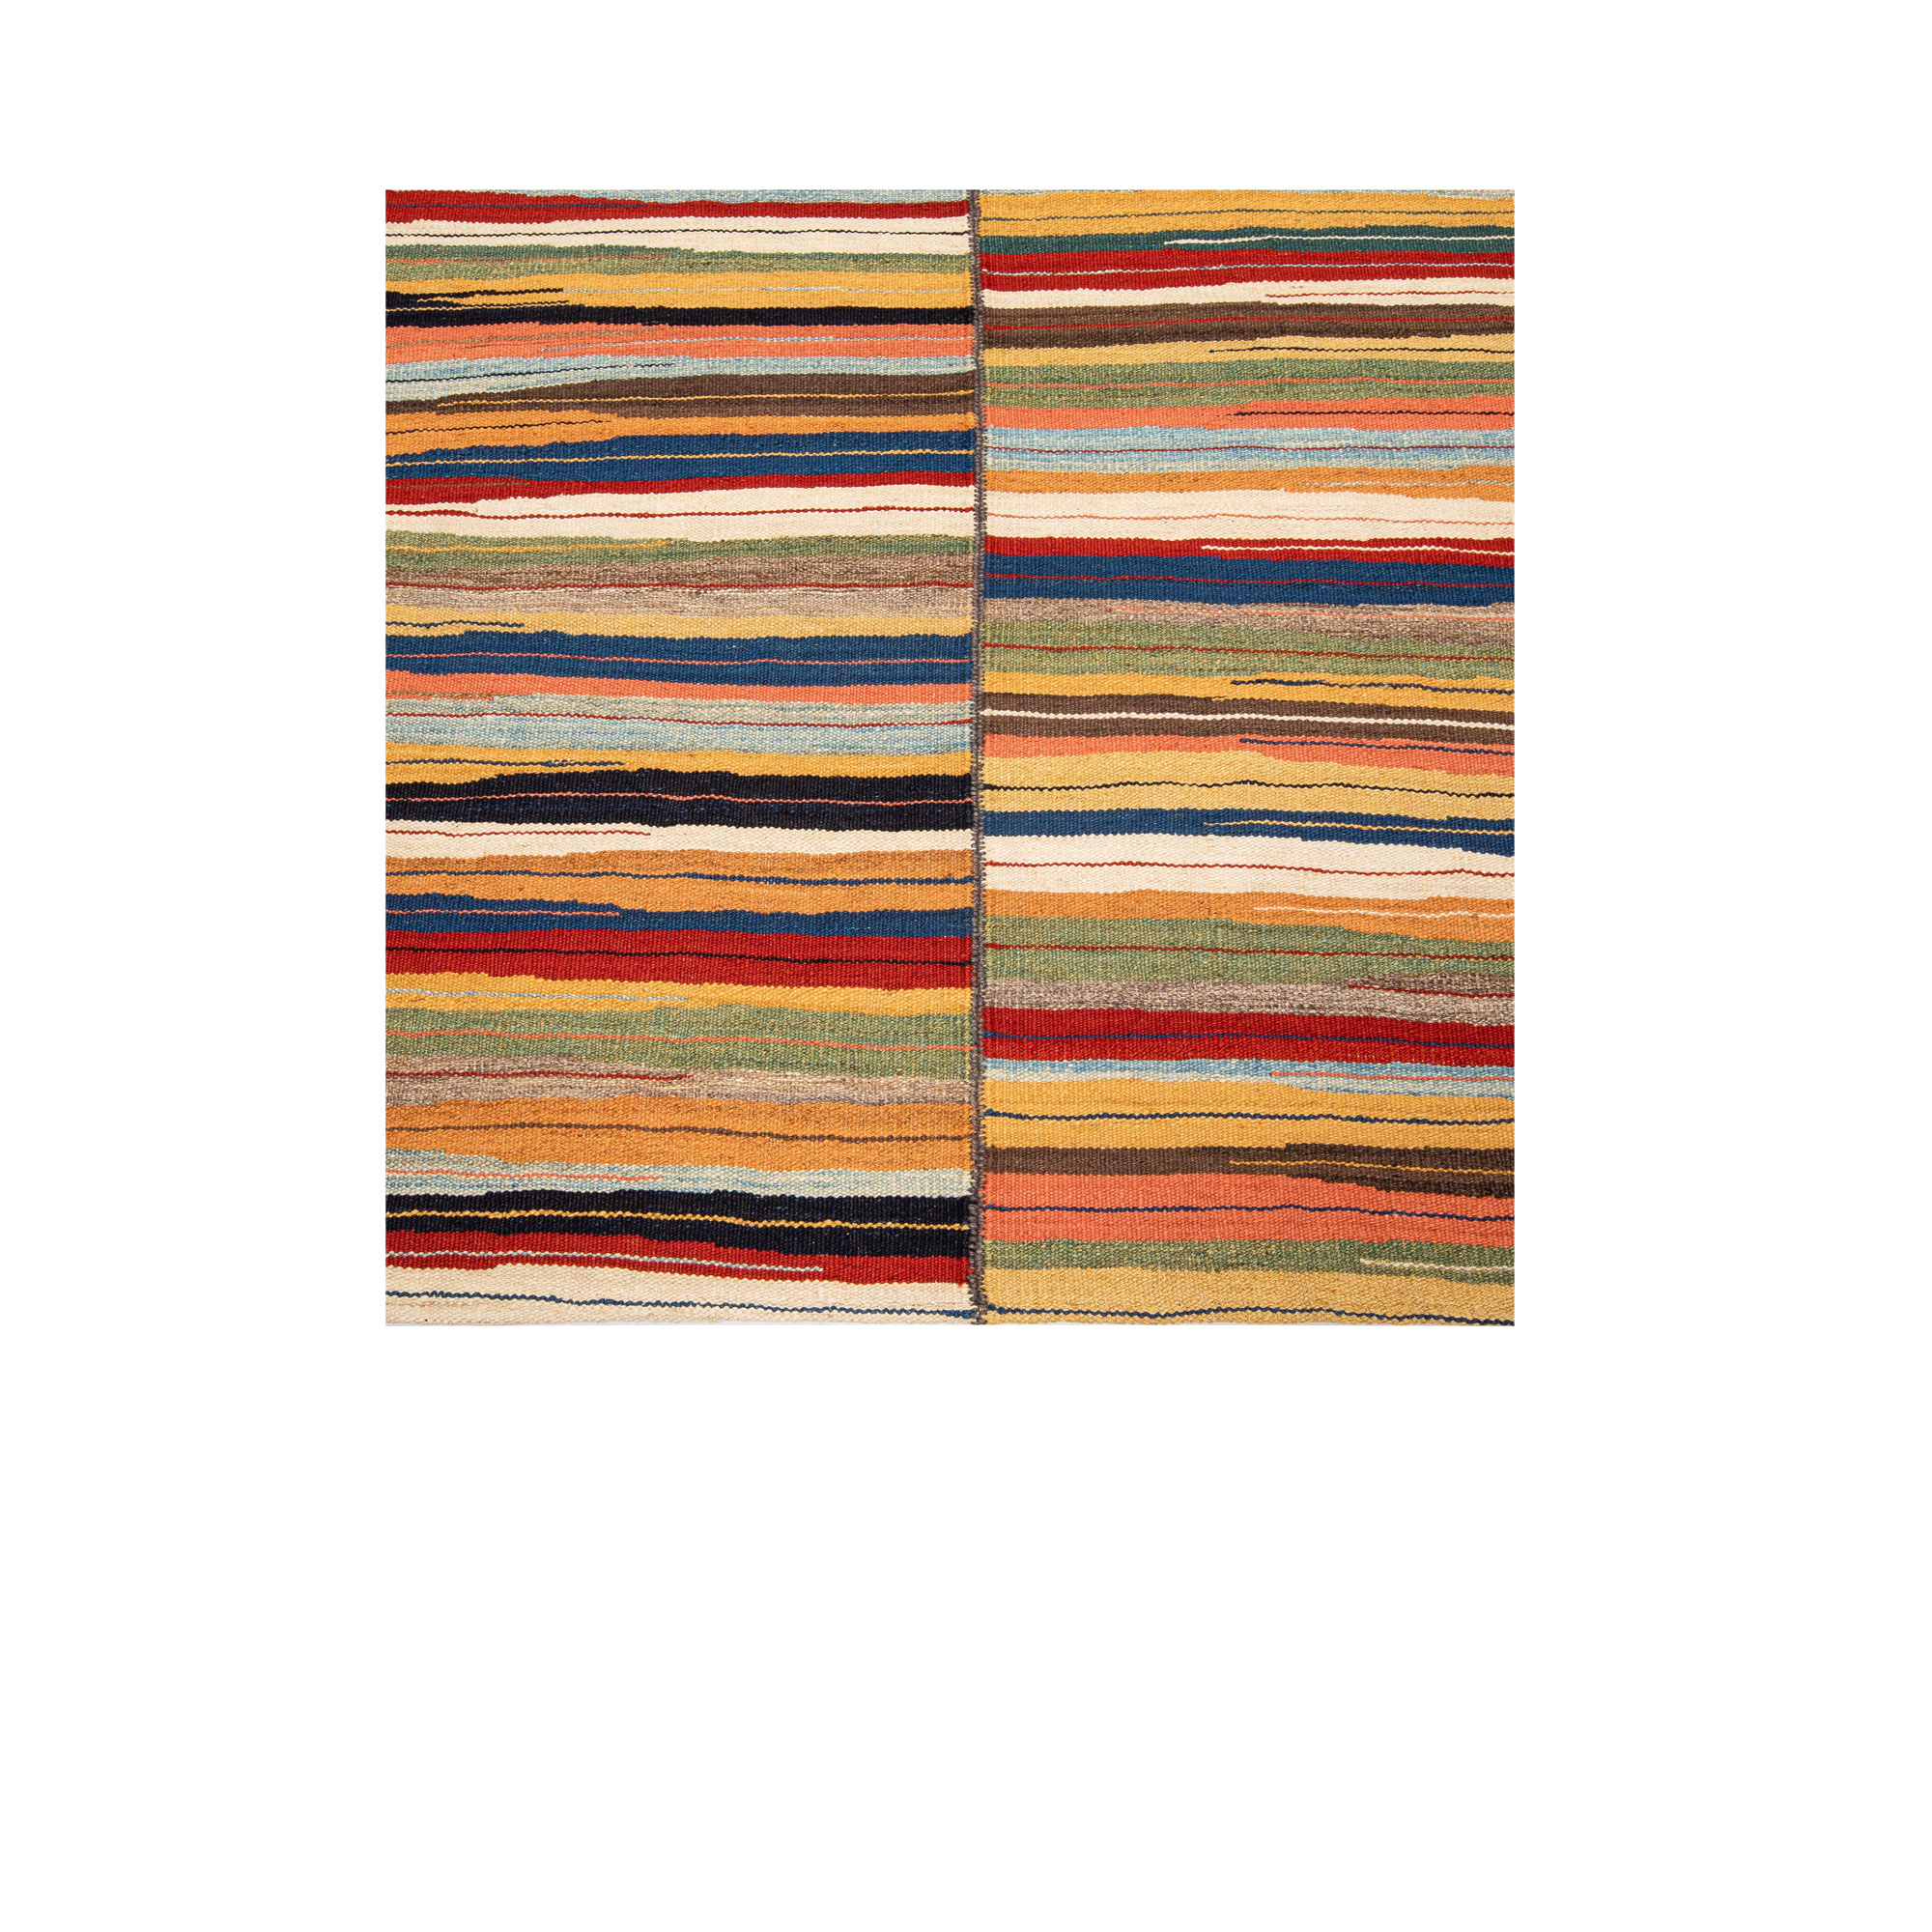 Mazandaran rug inspired by the kilims that were woven by Persian women in the Mazandaran Province. 